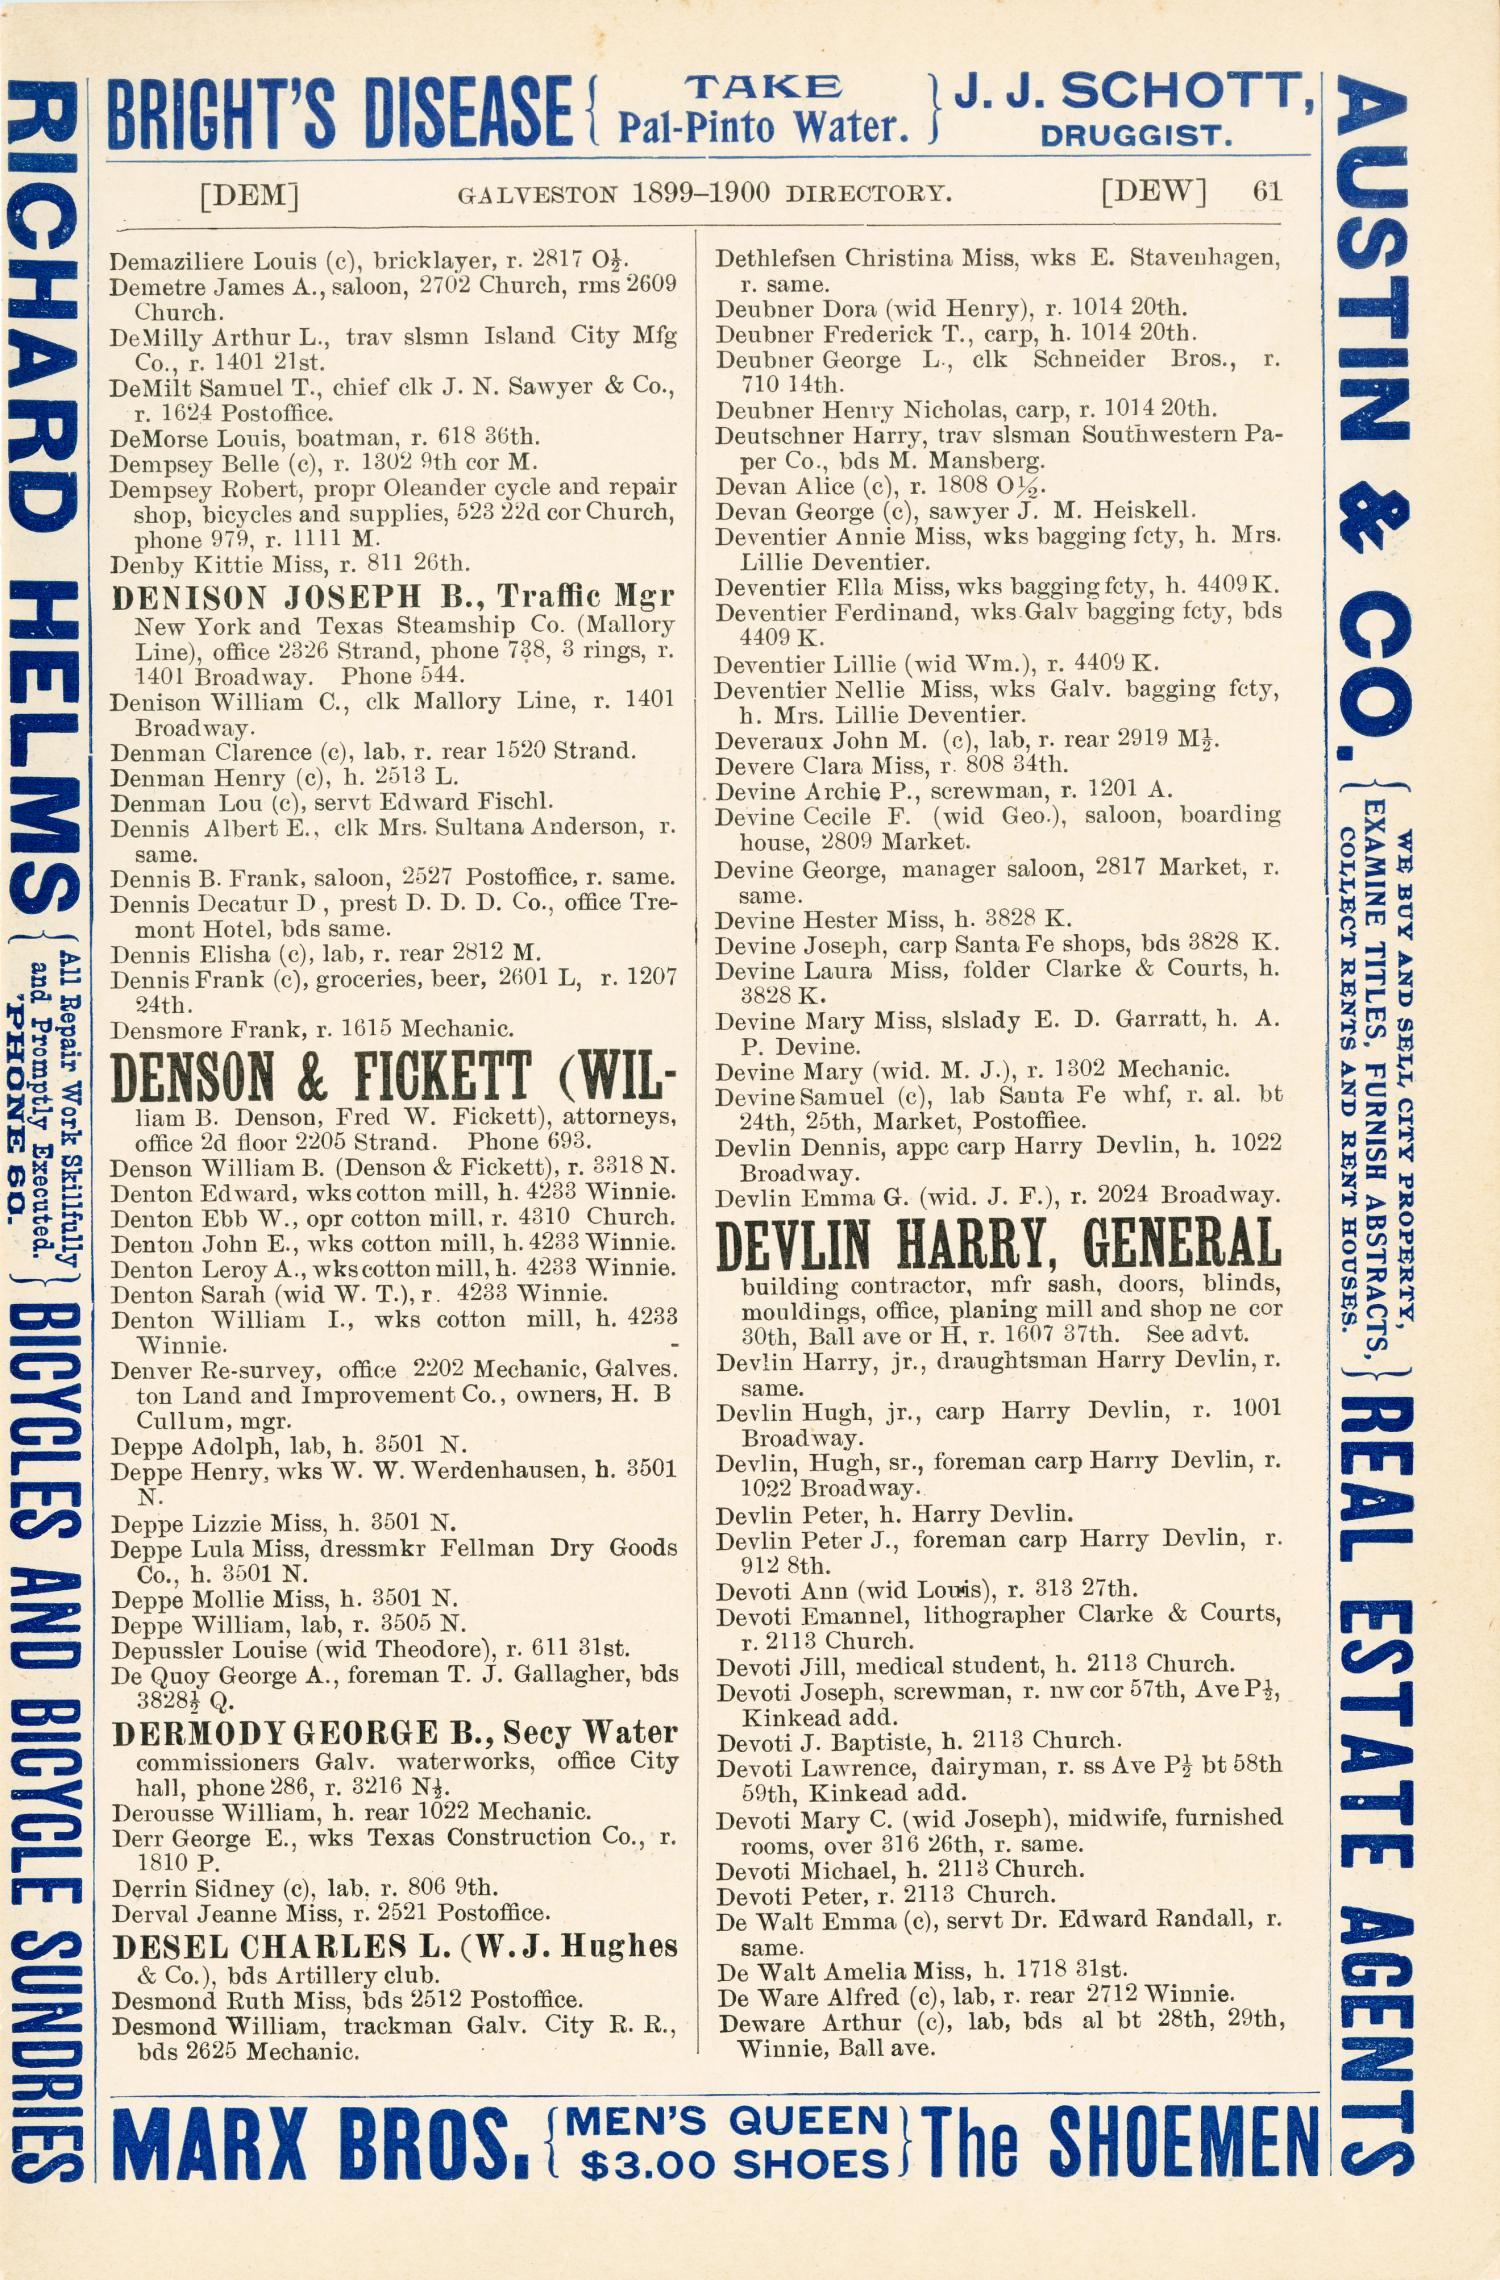 Morrison & Fourmy's General Directory of the City of Galveston: 1899-1900
                                                
                                                    61
                                                